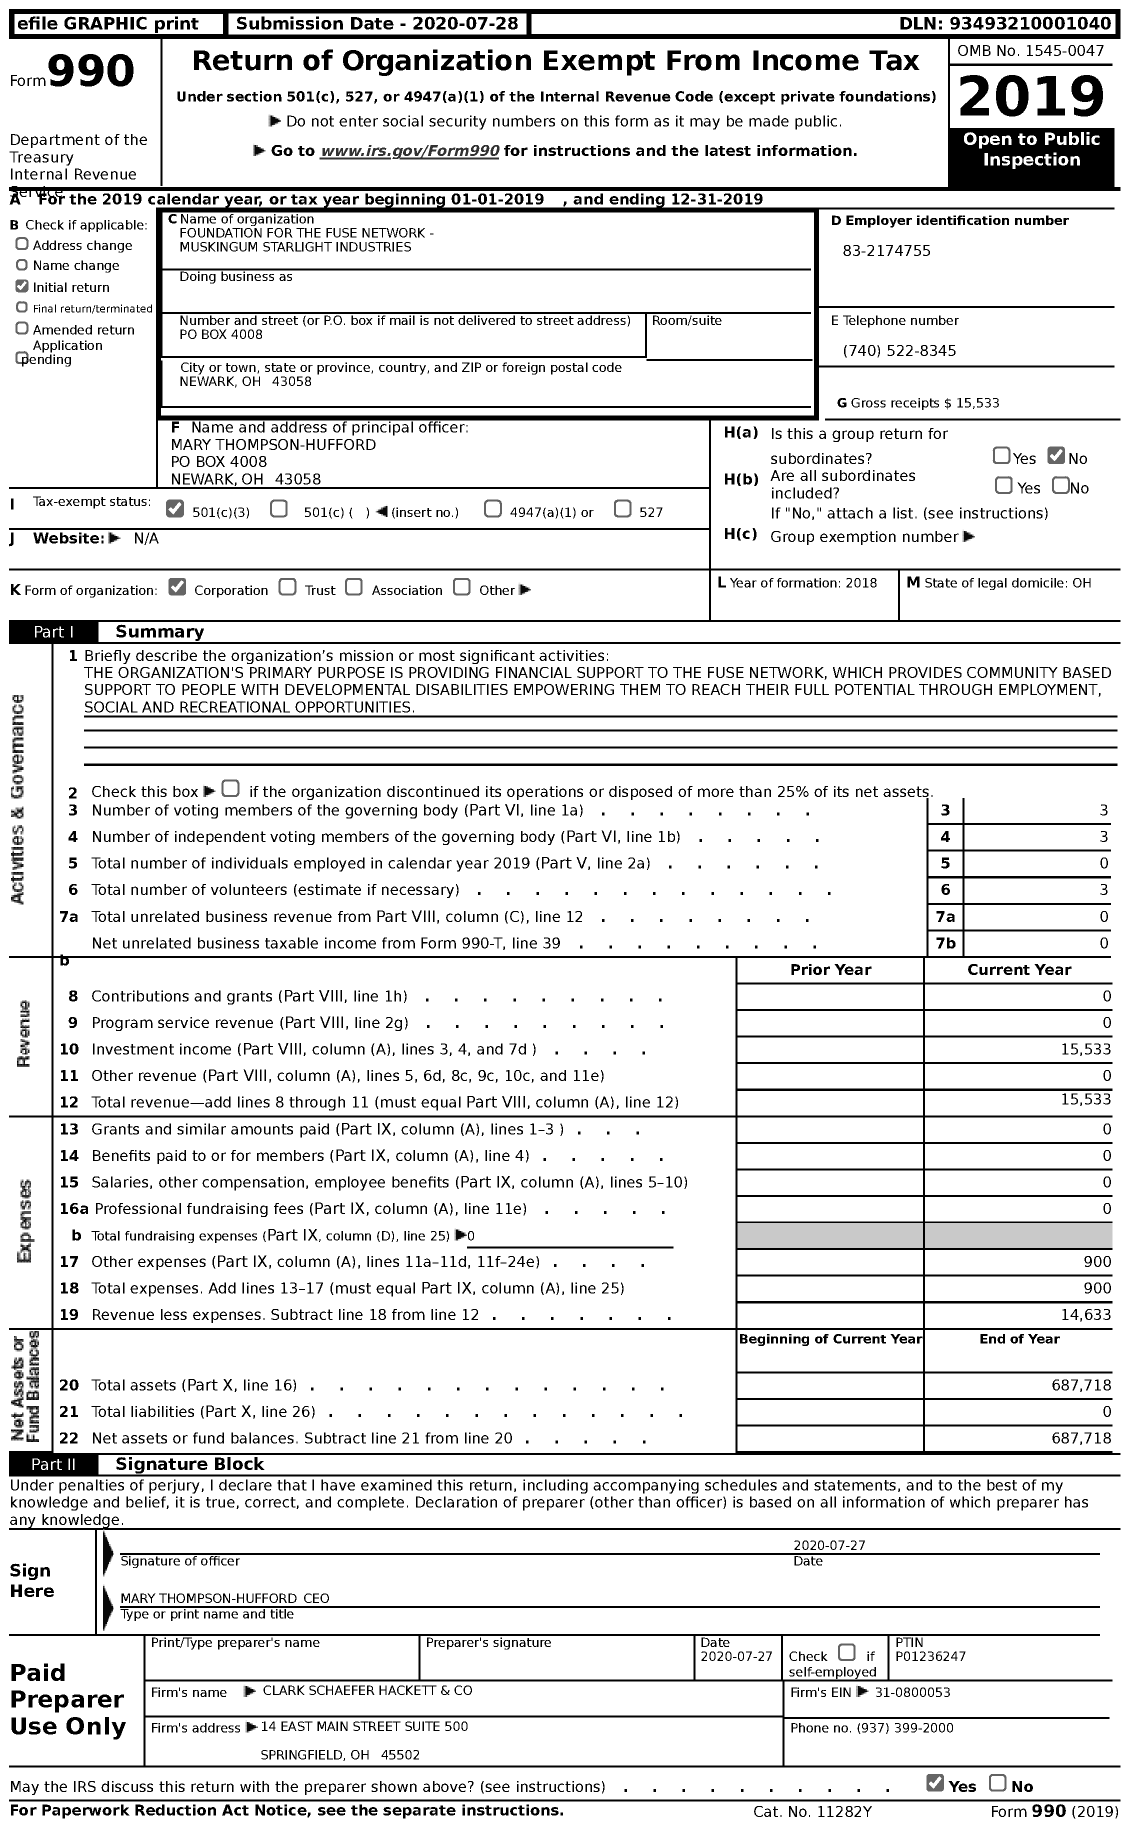 Image of first page of 2019 Form 990 for Foundation for the Fuse Network - Muskingum Starlight Industries